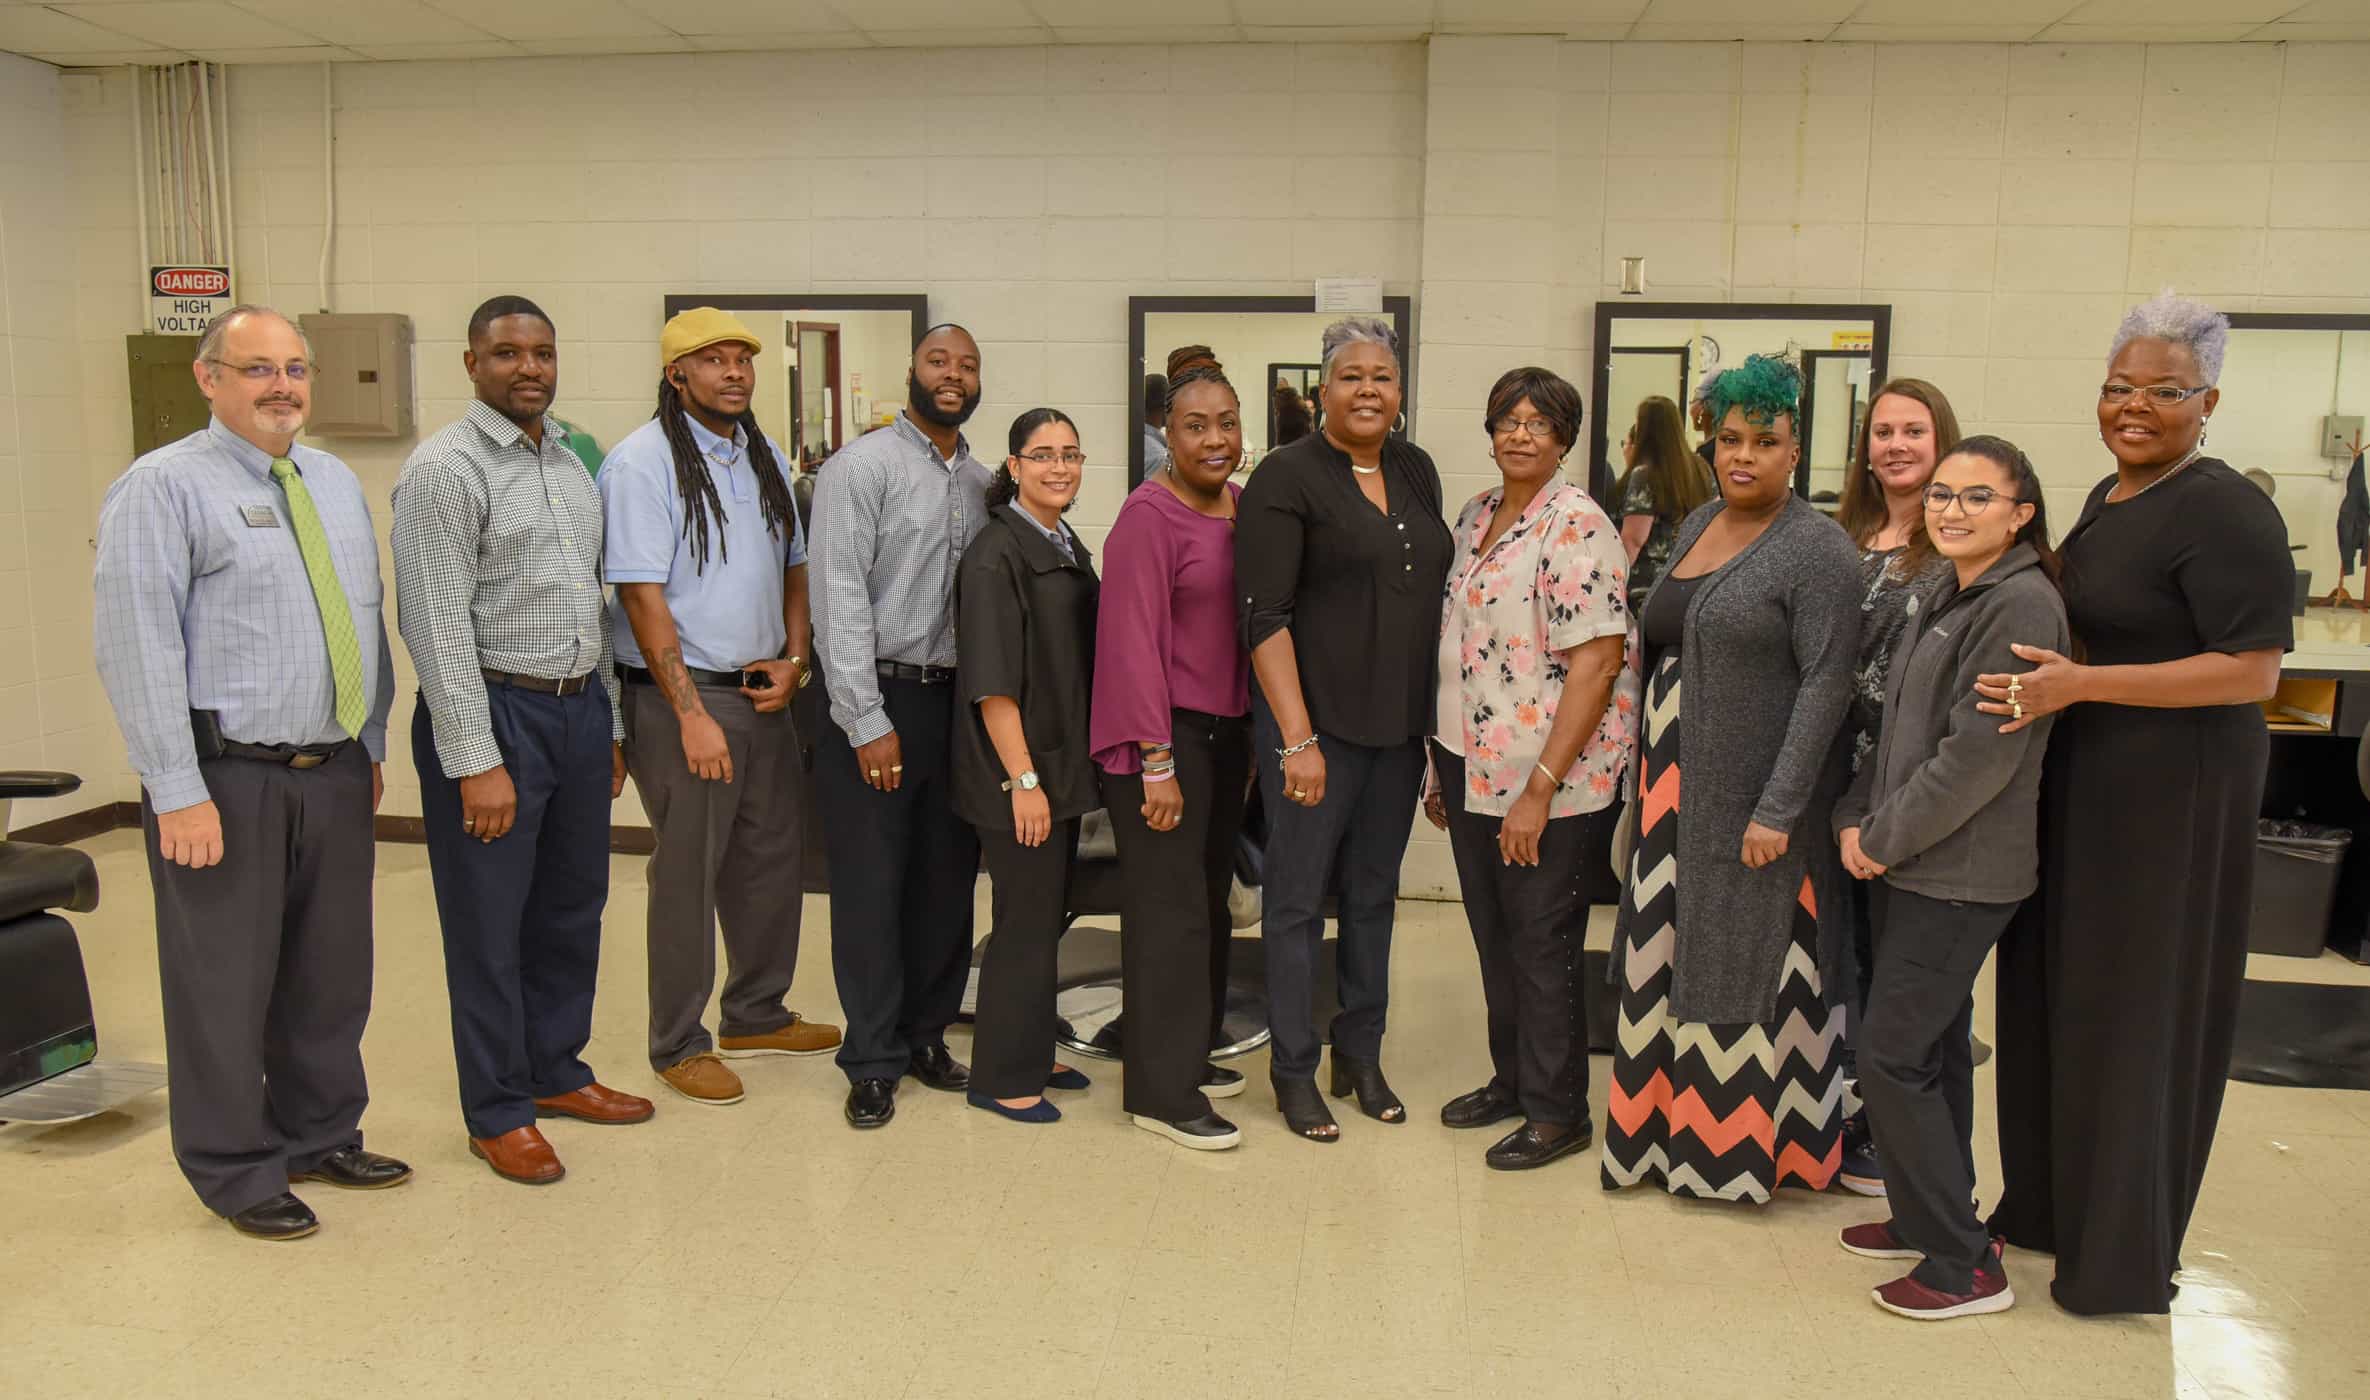 SGTC cosmetology and barbering advisory committee members stand together in the college's salon lab. Left to right: Dr. David Finley, Xavier Jackson, Adrain Hicks, Angelo Baisden, Anna Horton, Kembrial Harris, Tracy Finch,Martha Bruce, Armenta Battle, Danielle McSpadden, Yesenia Gutierrez and Dorothea Lusane-McKenzie.